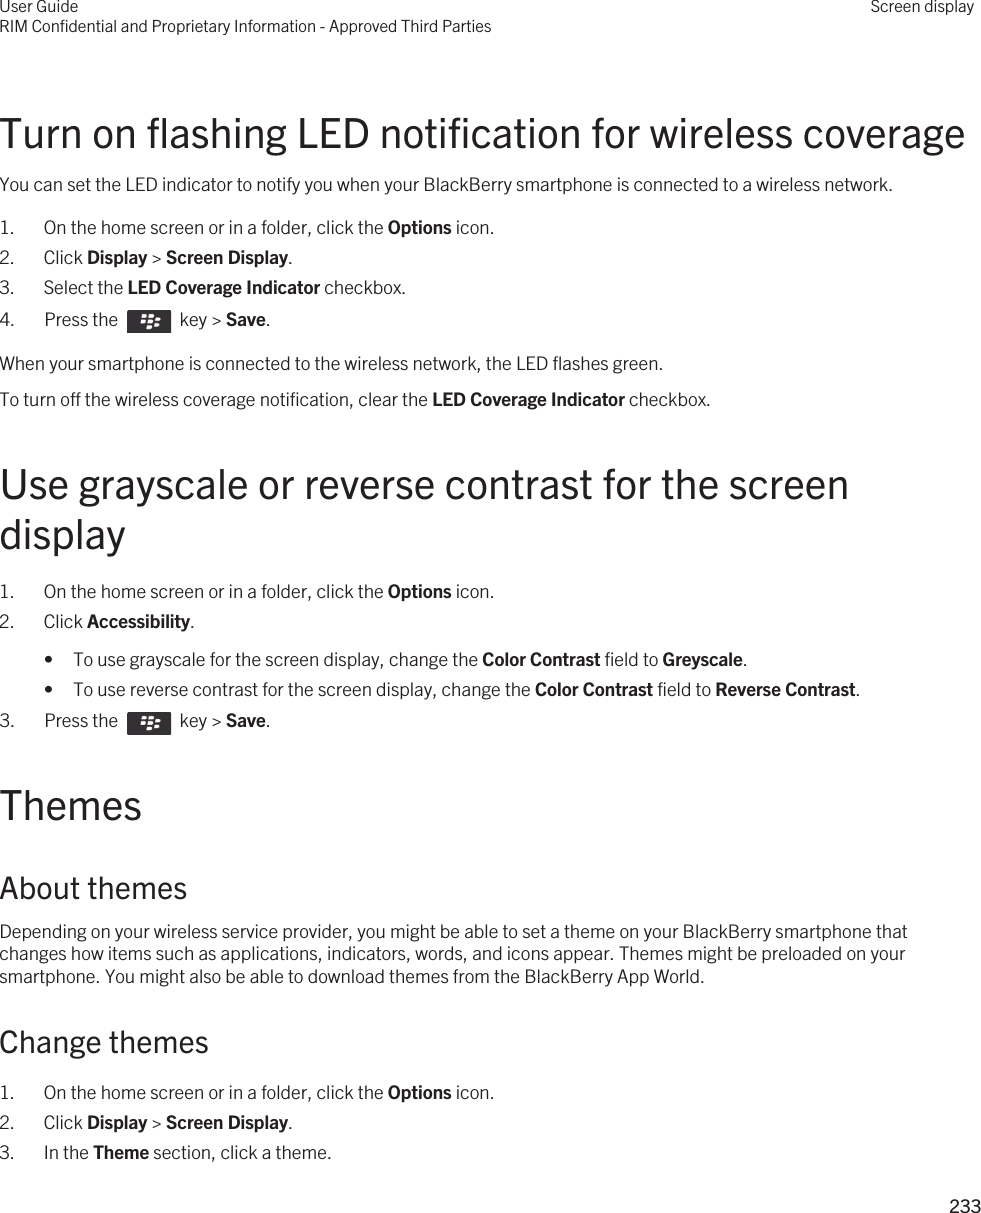 Turn on flashing LED notification for wireless coverageYou can set the LED indicator to notify you when your BlackBerry smartphone is connected to a wireless network.1. On the home screen or in a folder, click the Options icon.2. Click Display &gt; Screen Display.3. Select the LED Coverage Indicator checkbox.4.  Press the    key &gt; Save. When your smartphone is connected to the wireless network, the LED flashes green.To turn off the wireless coverage notification, clear the LED Coverage Indicator checkbox.Use grayscale or reverse contrast for the screen display1. On the home screen or in a folder, click the Options icon.2. Click Accessibility.• To use grayscale for the screen display, change the Color Contrast field to Greyscale.• To use reverse contrast for the screen display, change the Color Contrast field to Reverse Contrast.3.  Press the    key &gt; Save. ThemesAbout themesDepending on your wireless service provider, you might be able to set a theme on your BlackBerry smartphone that changes how items such as applications, indicators, words, and icons appear. Themes might be preloaded on your smartphone. You might also be able to download themes from the BlackBerry App World.Change themes1. On the home screen or in a folder, click the Options icon.2. Click Display &gt; Screen Display.3. In the Theme section, click a theme.User GuideRIM Confidential and Proprietary Information - Approved Third PartiesScreen display233 